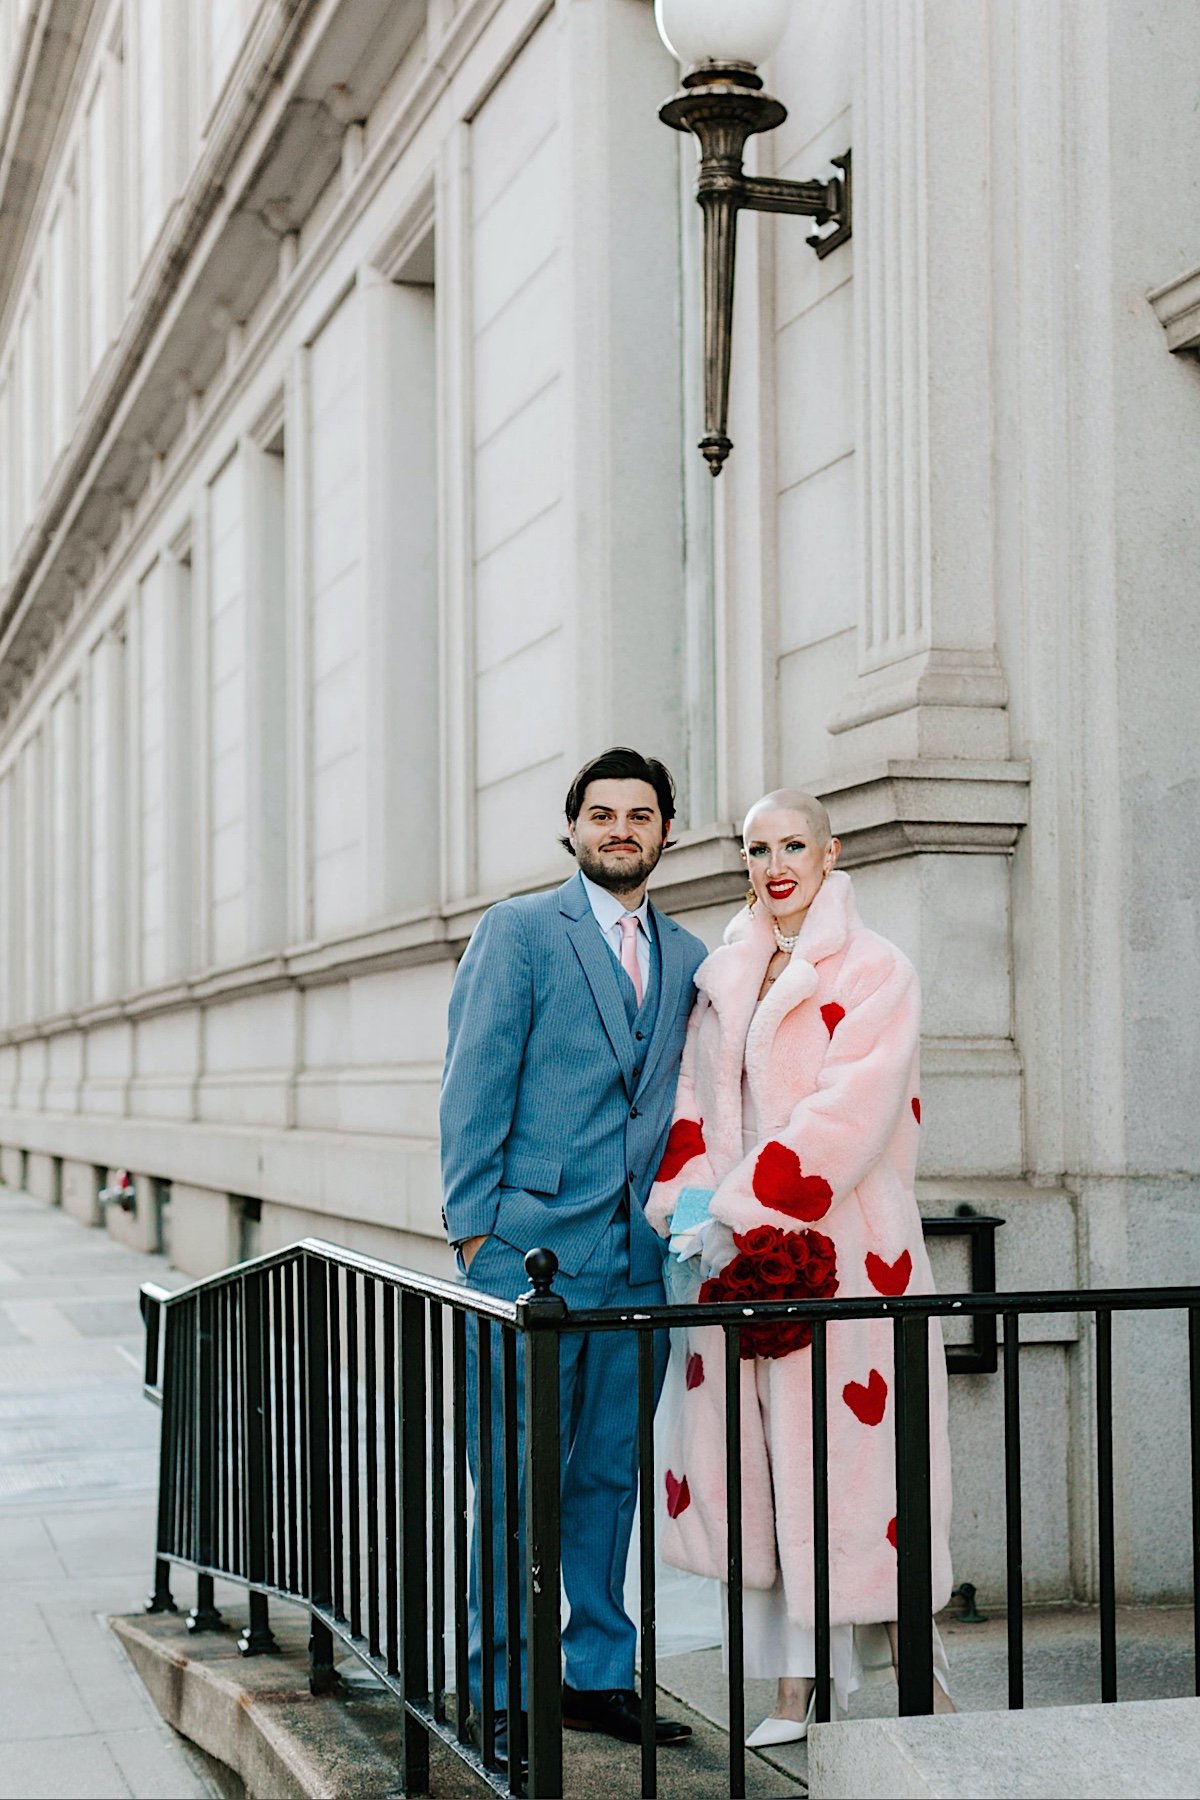 17_CMP-Alex-Marcelle-137_Trendy intimate downtown Raleigh, North Carolina wedding with heart coat.jpg